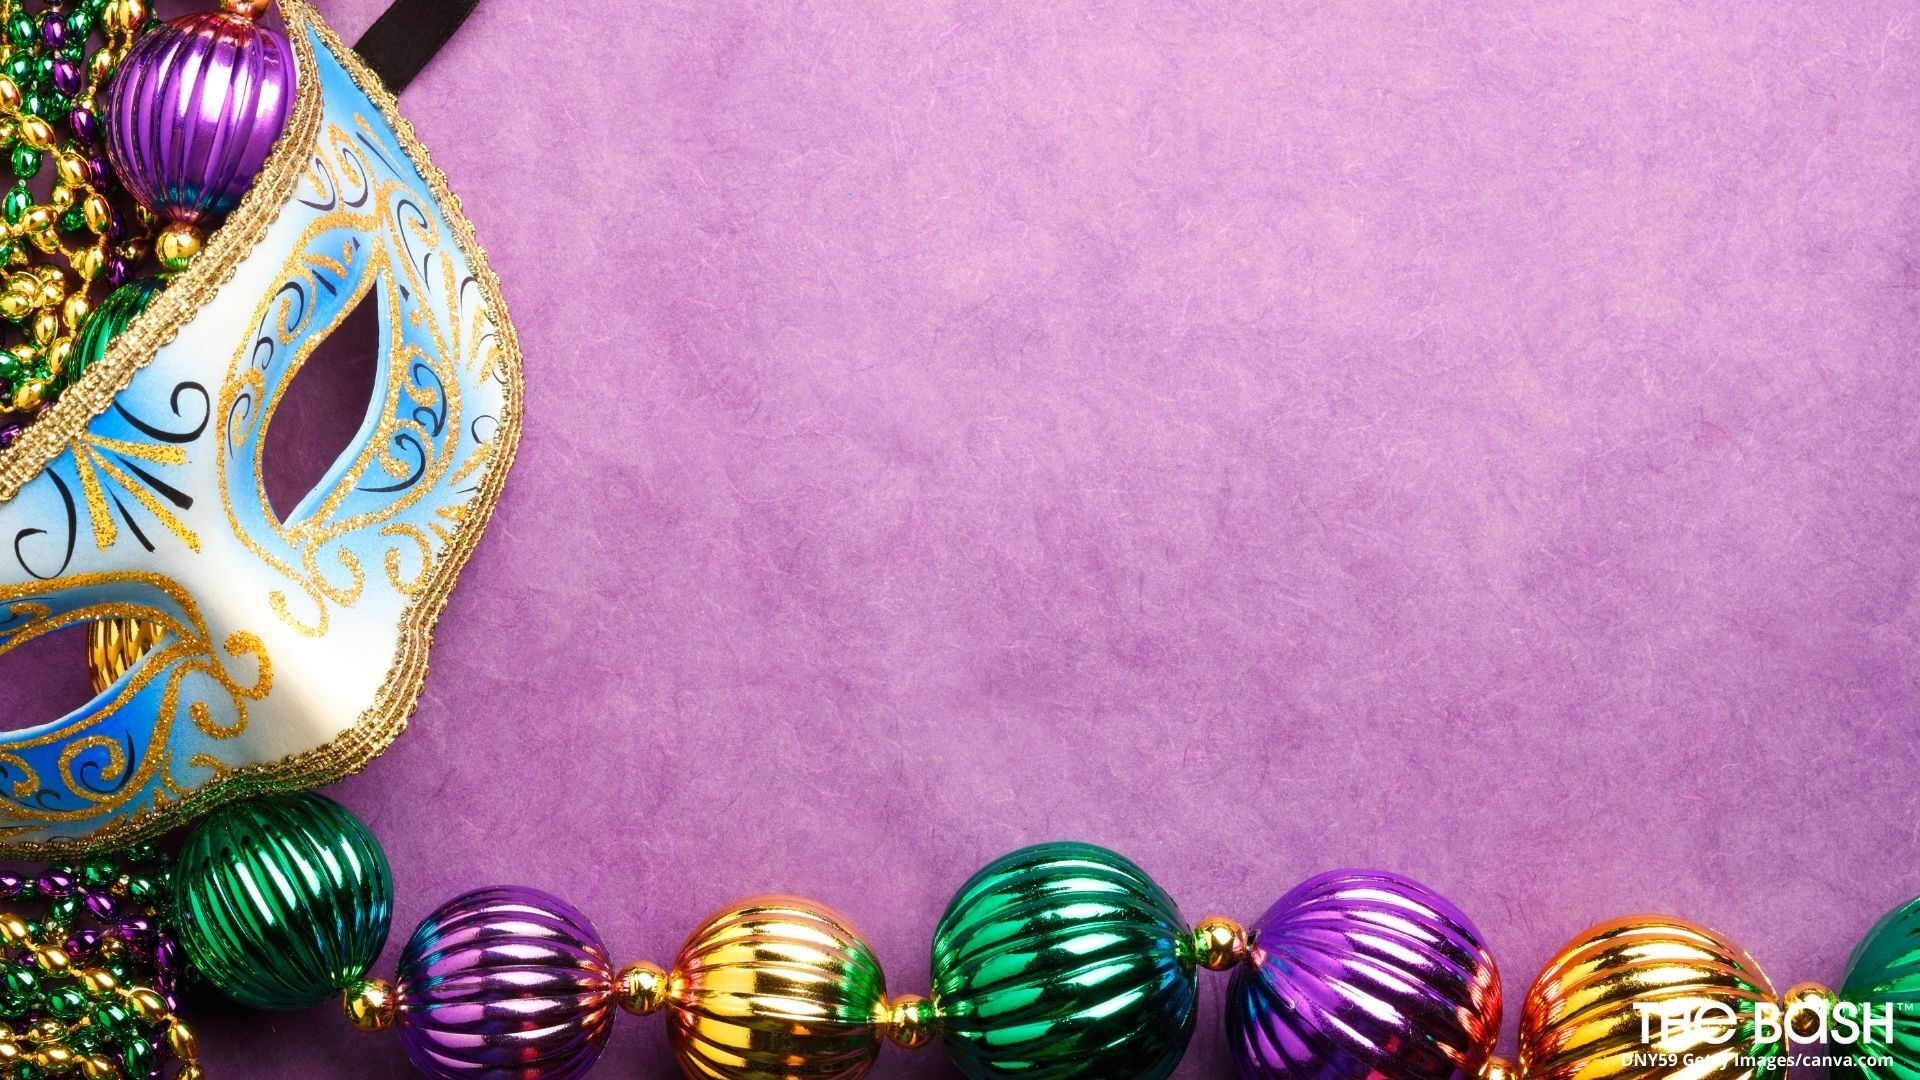 30 Colorful Mardi Gras Zoom Backgrounds - Free Download - The Bash